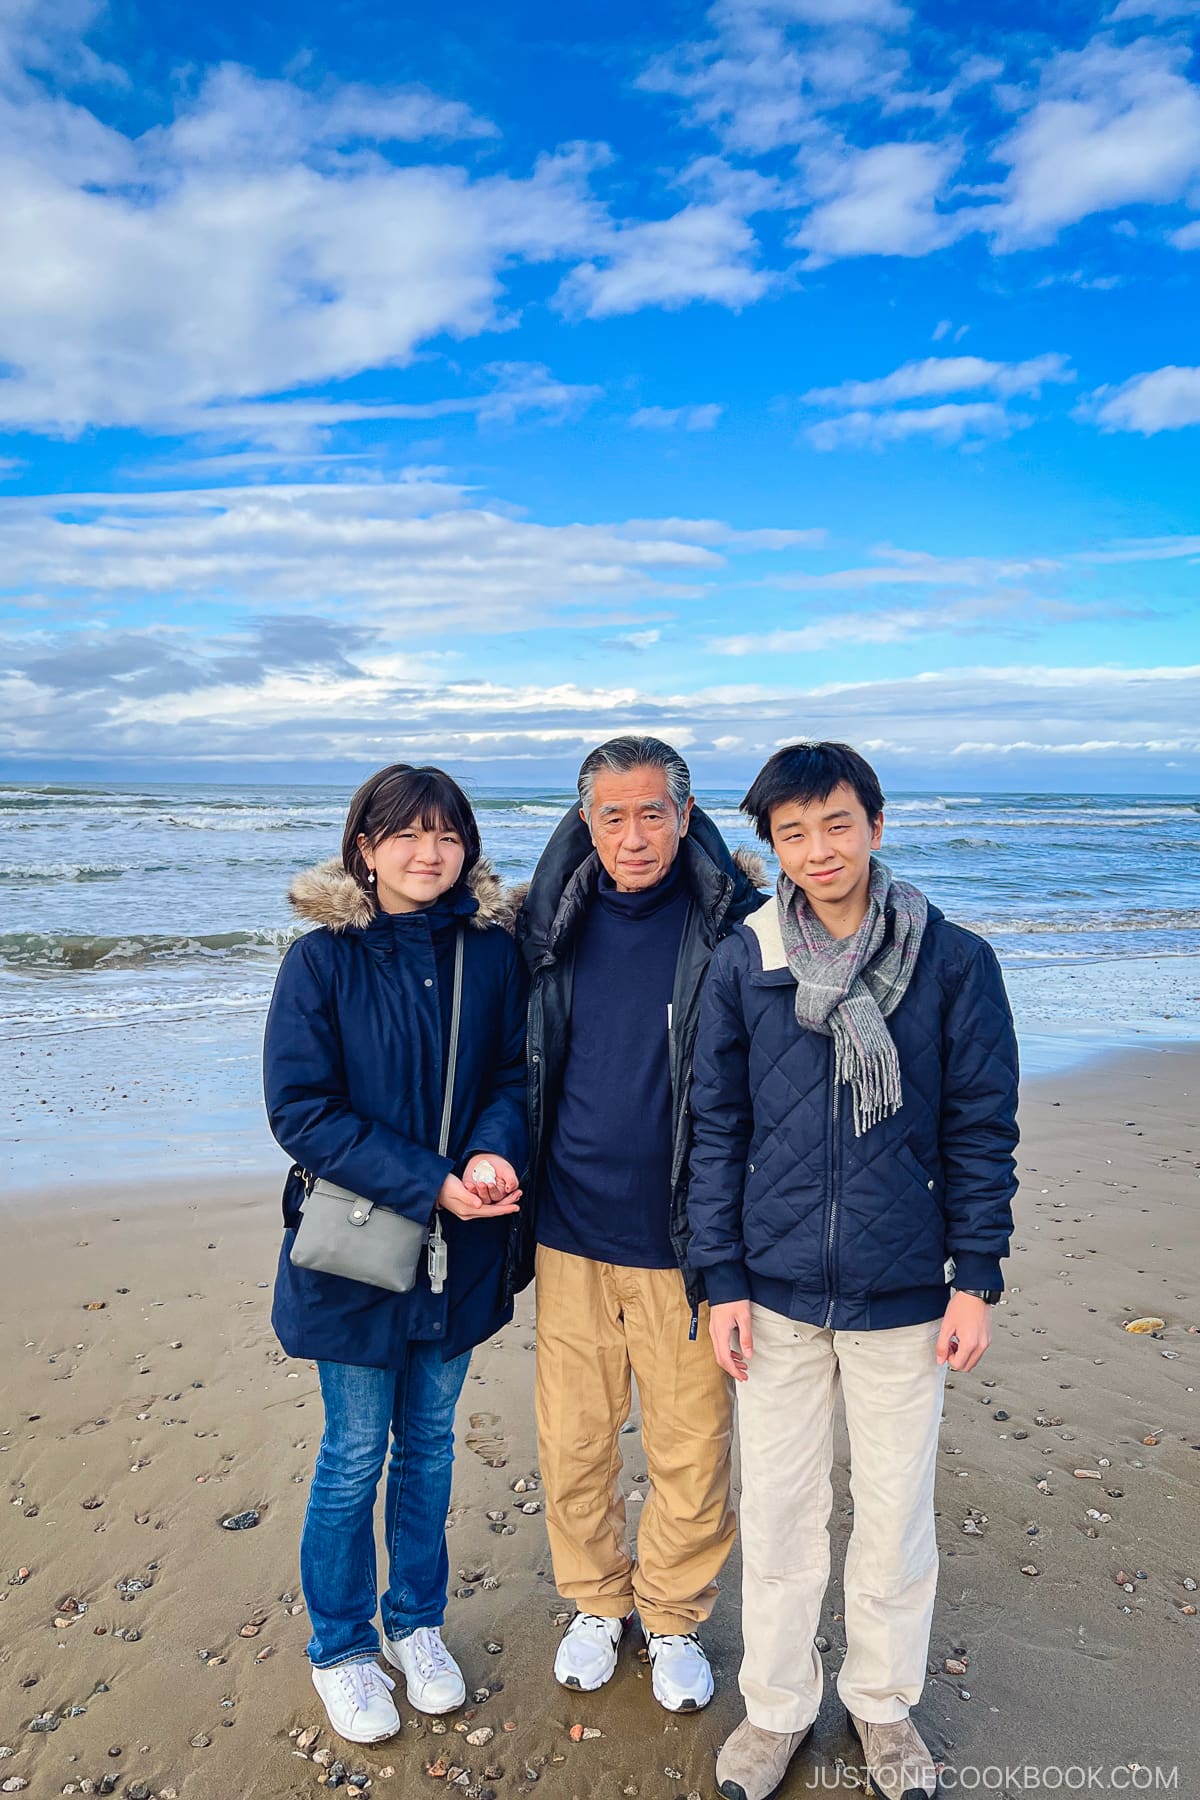 two teens standing next to an older man on the beach